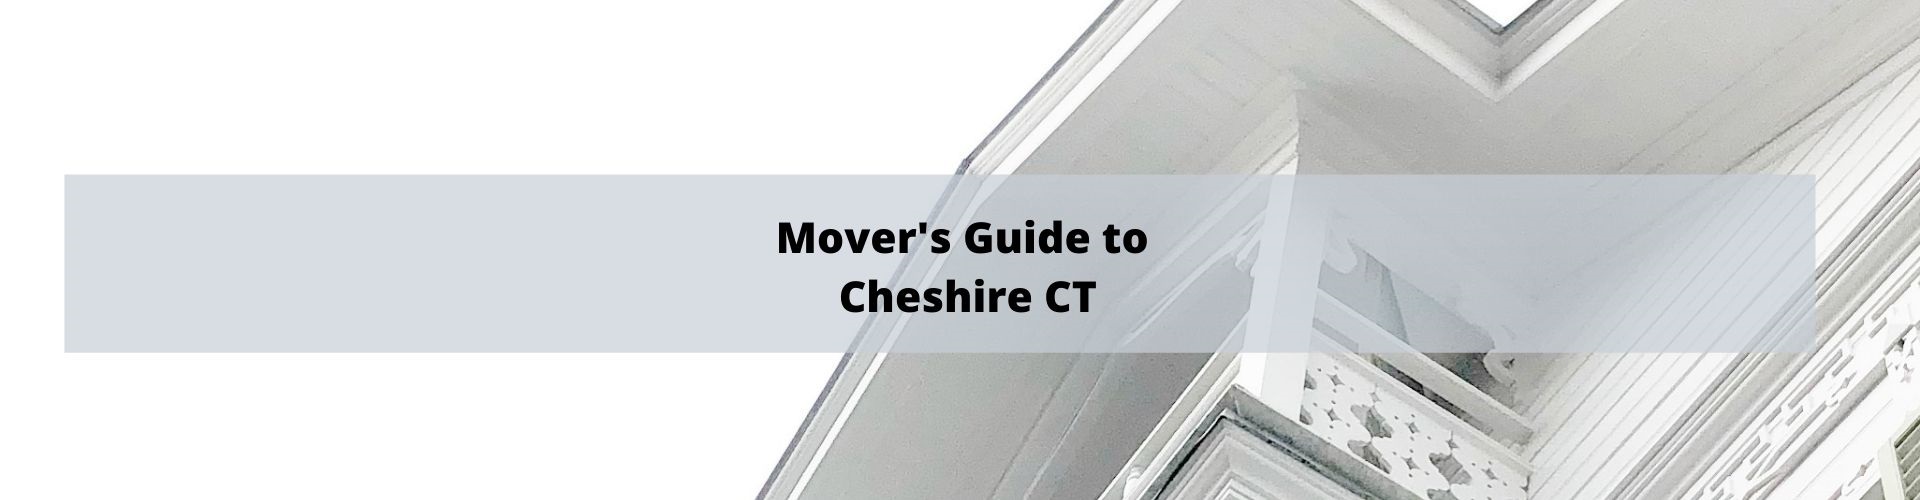 Mover's Guide to Cheshire CT